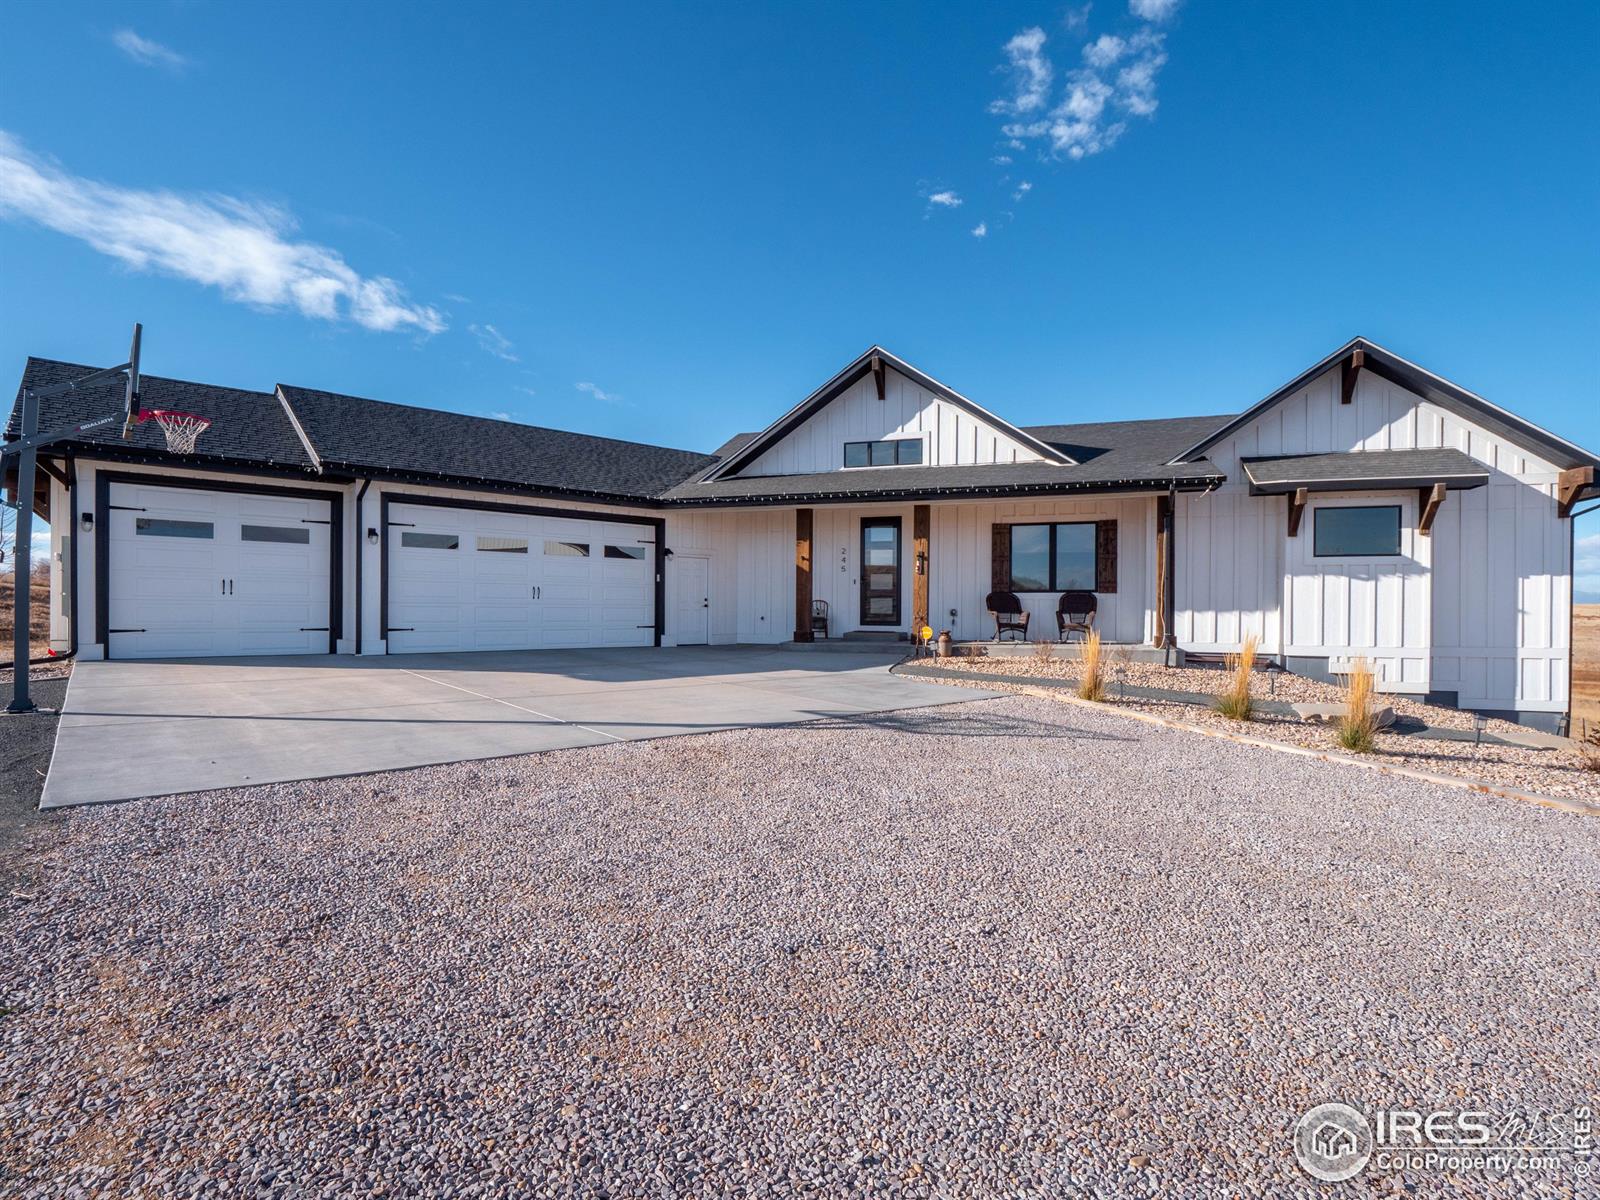 245 83rd, Greeley, CO